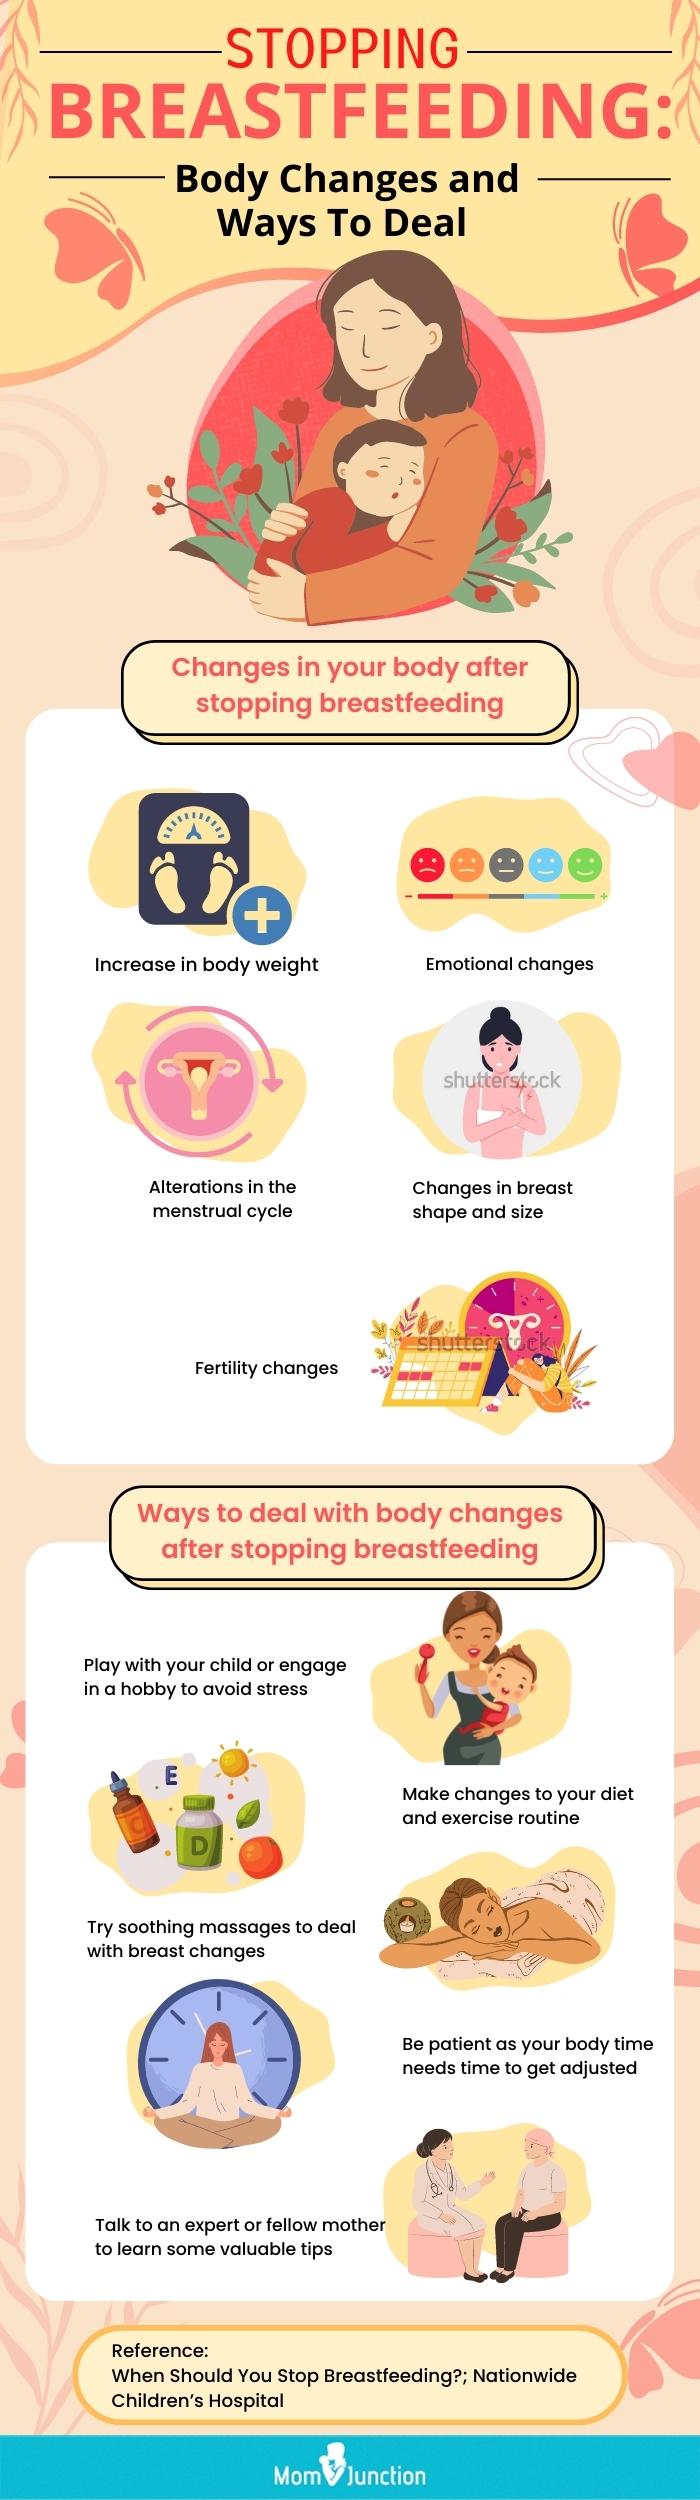 https://www.momjunction.com/wp-content/uploads/2021/07/Stopping-Breastfeeding-Body-Changes-And-Ways-To-Deal-Row-1278-new-sheet-2-0-.jpg